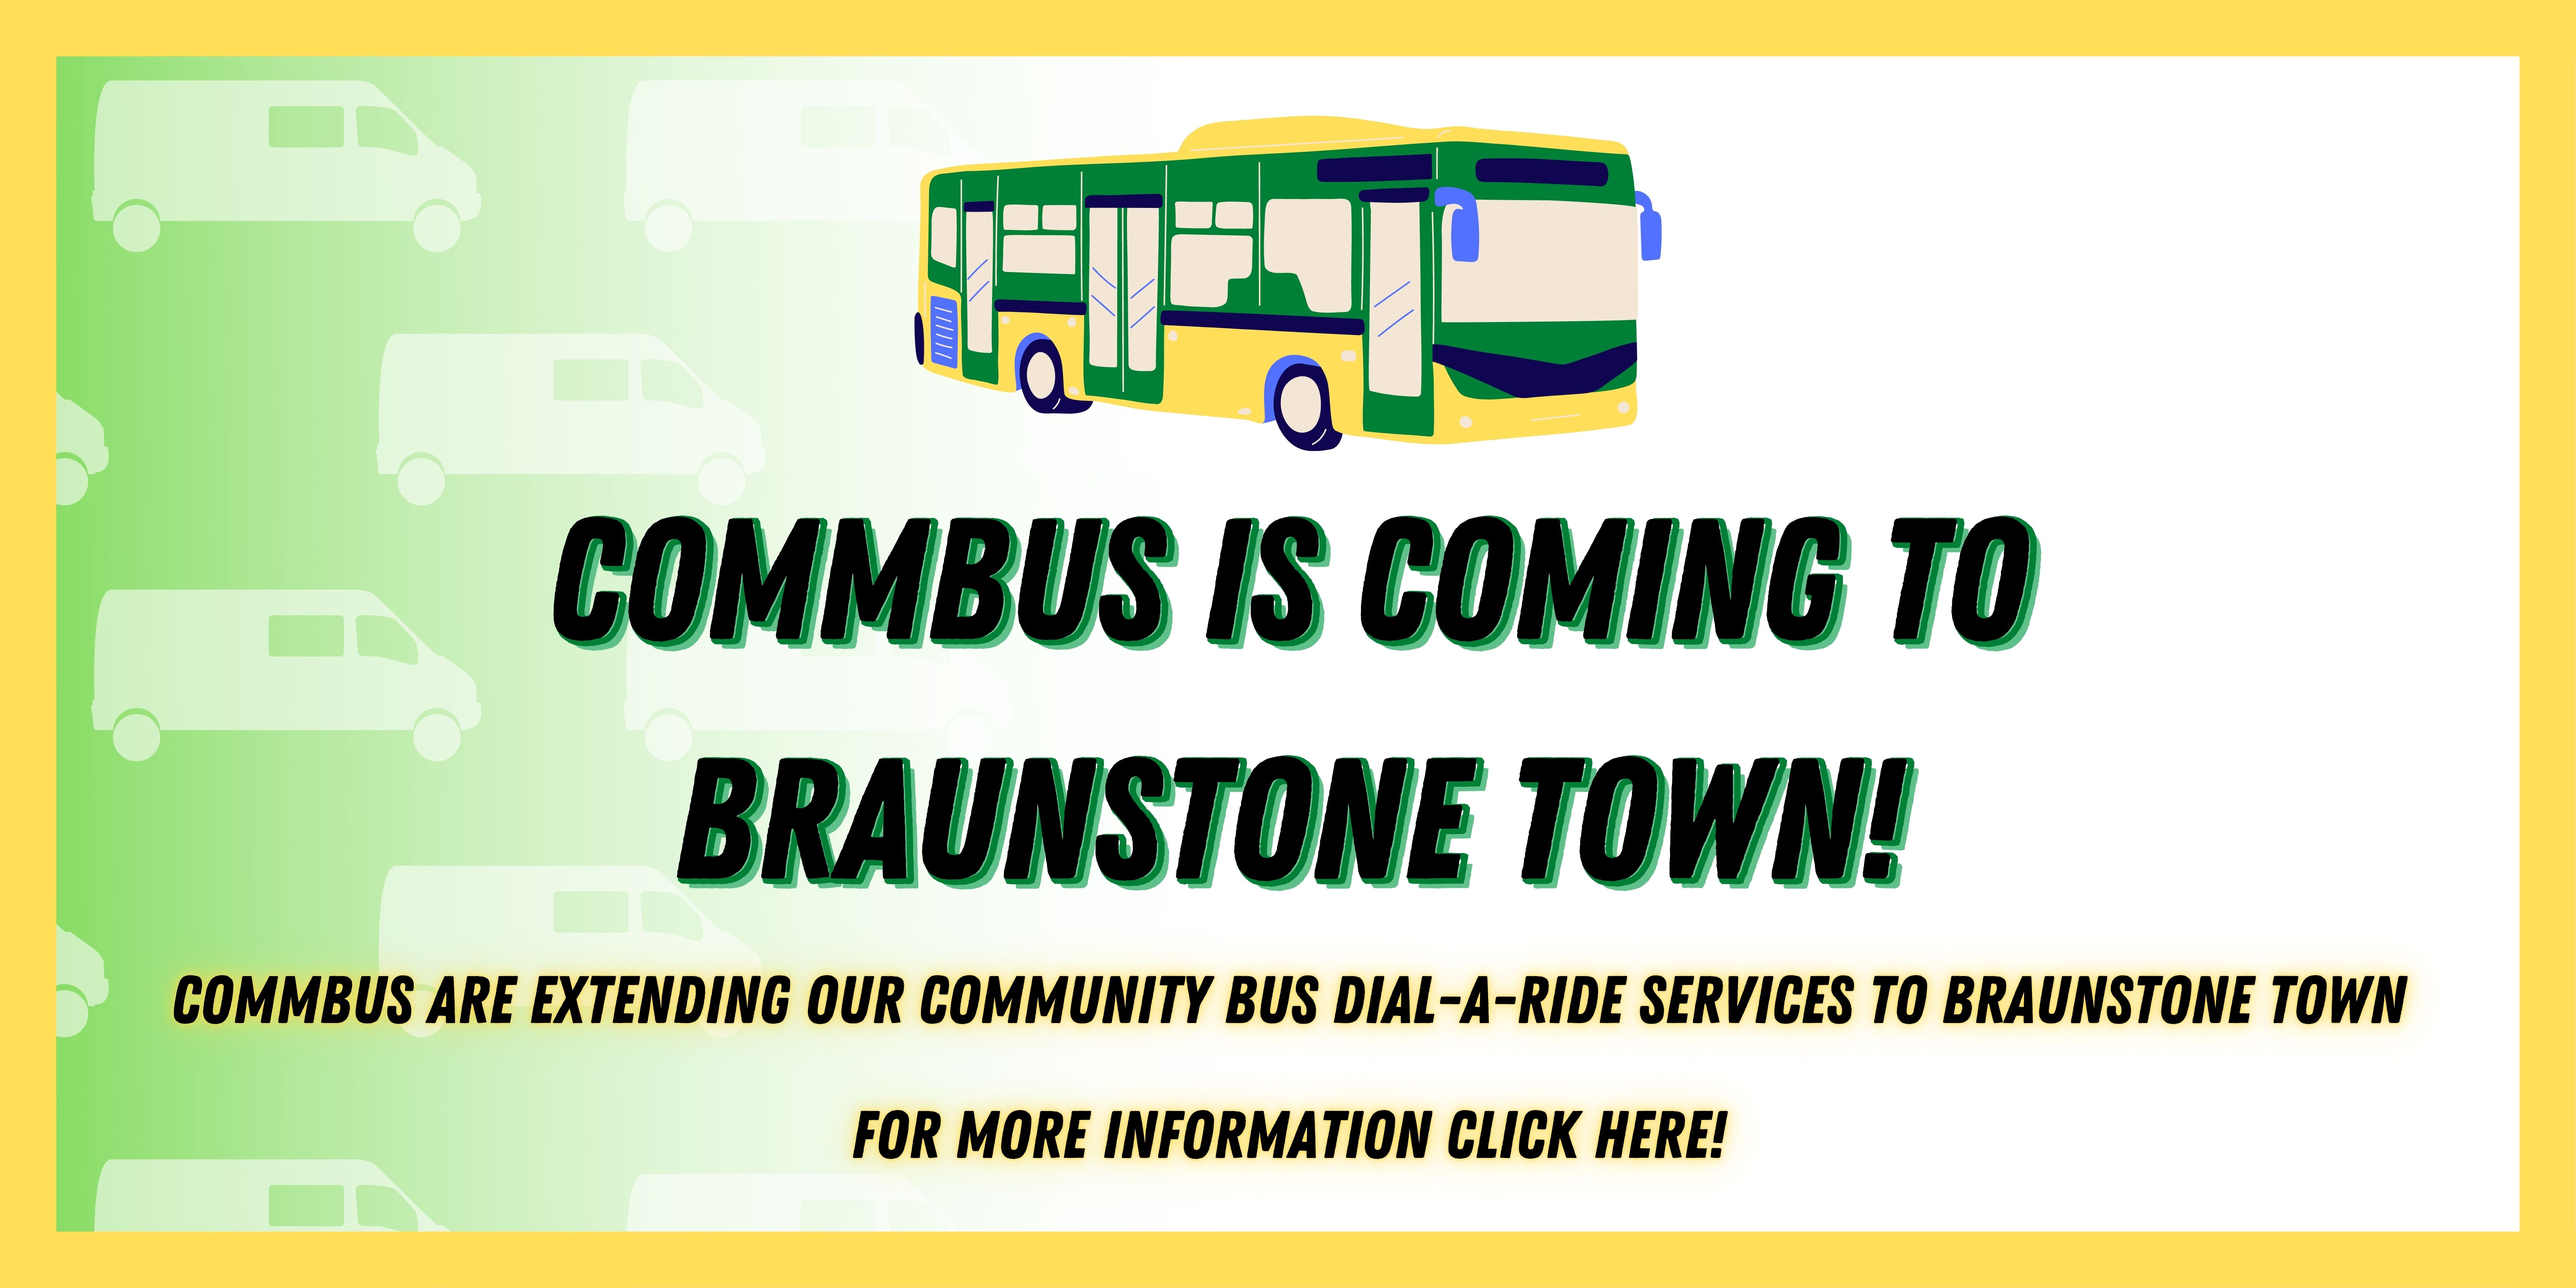 COMMBUS IS COMING TO BRAUNSTONE TOWN!